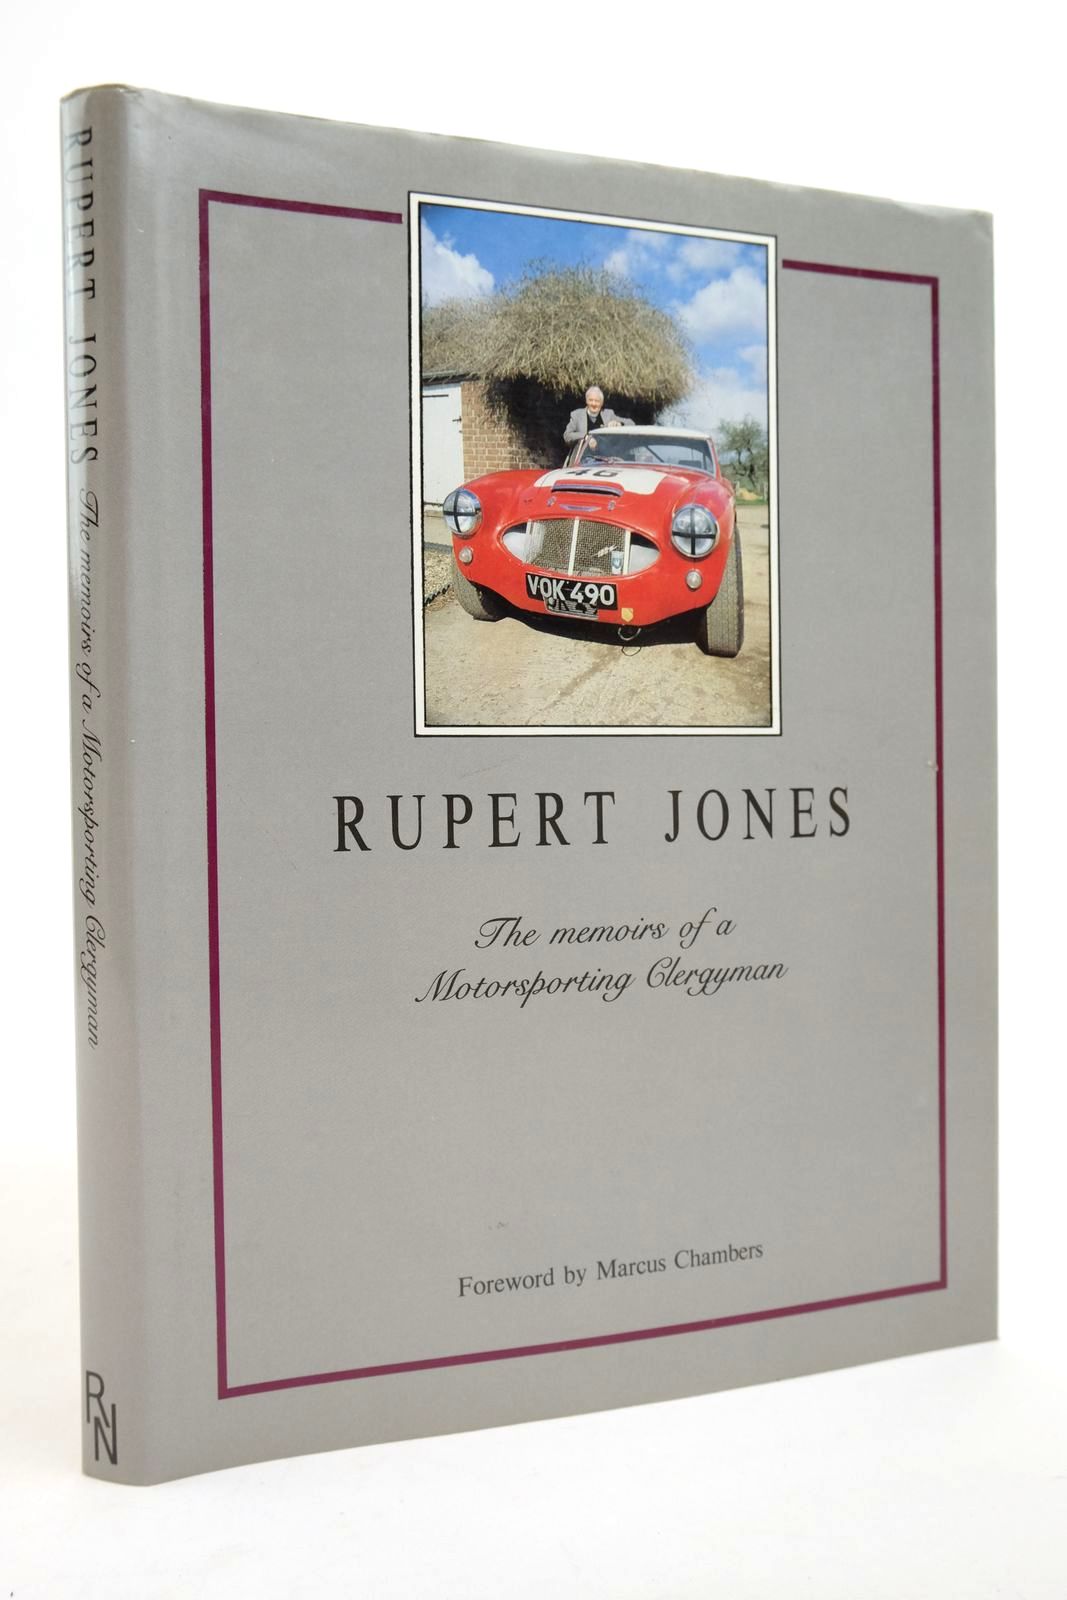 Photo of THE MEMOIRS OF A MOTORSPORTING CLERGYMAN written by Jones, Rupert published by Richard Netherwood Limited (STOCK CODE: 2140140)  for sale by Stella & Rose's Books